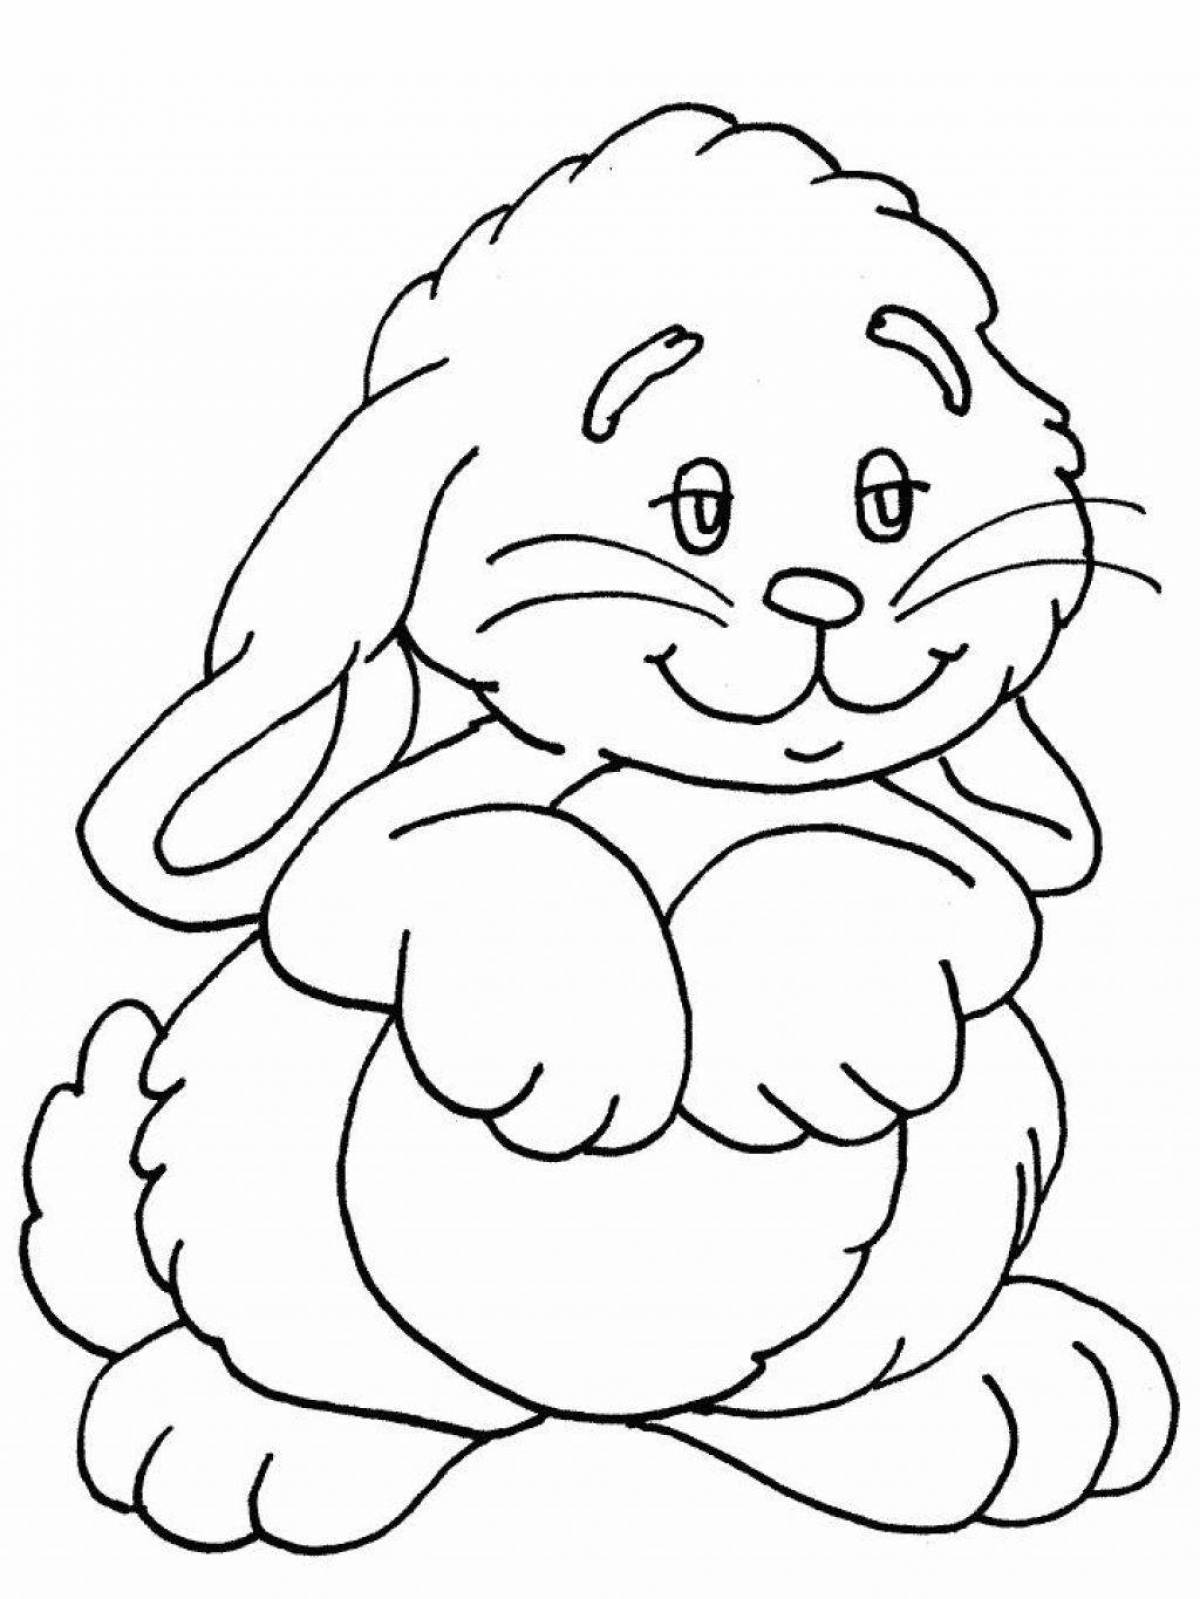 Fluttering bunny coloring book